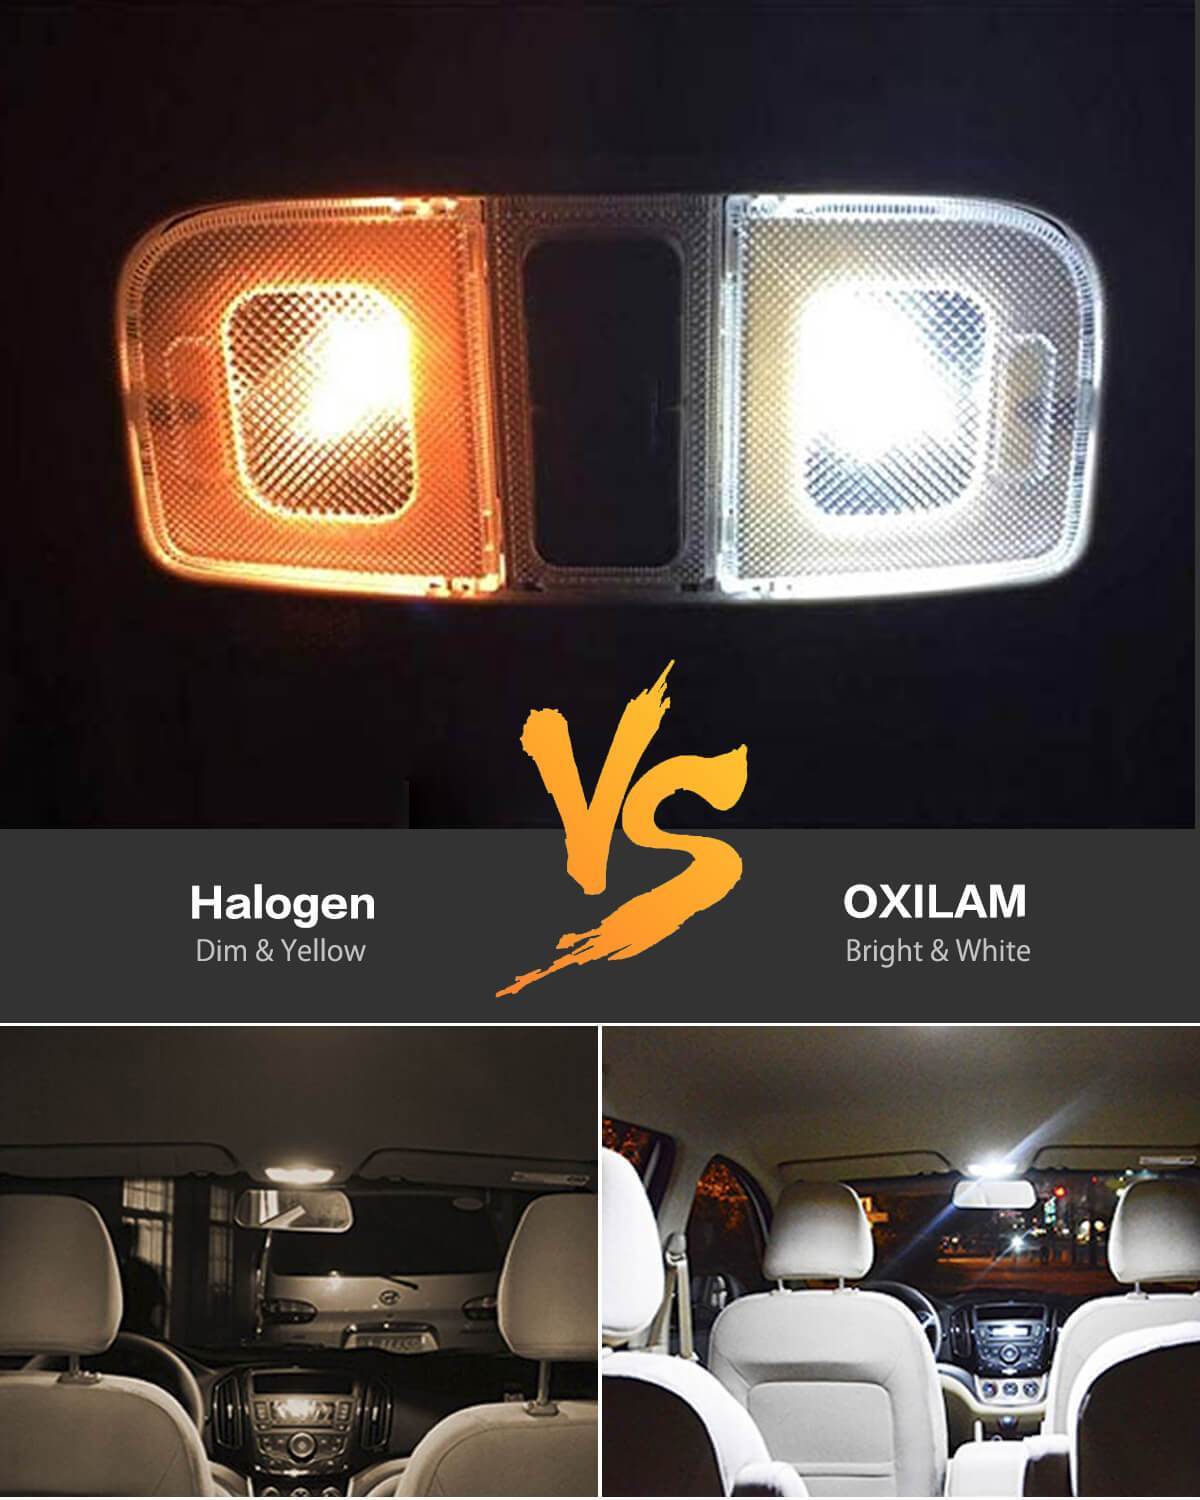 OXILAM 194 LED Bulbs Super Bright 6000K White with High Power Chipsets for  T10 W5W 168 2825 LED Bulbs Replacement, Widely Used as Parking Lights Door